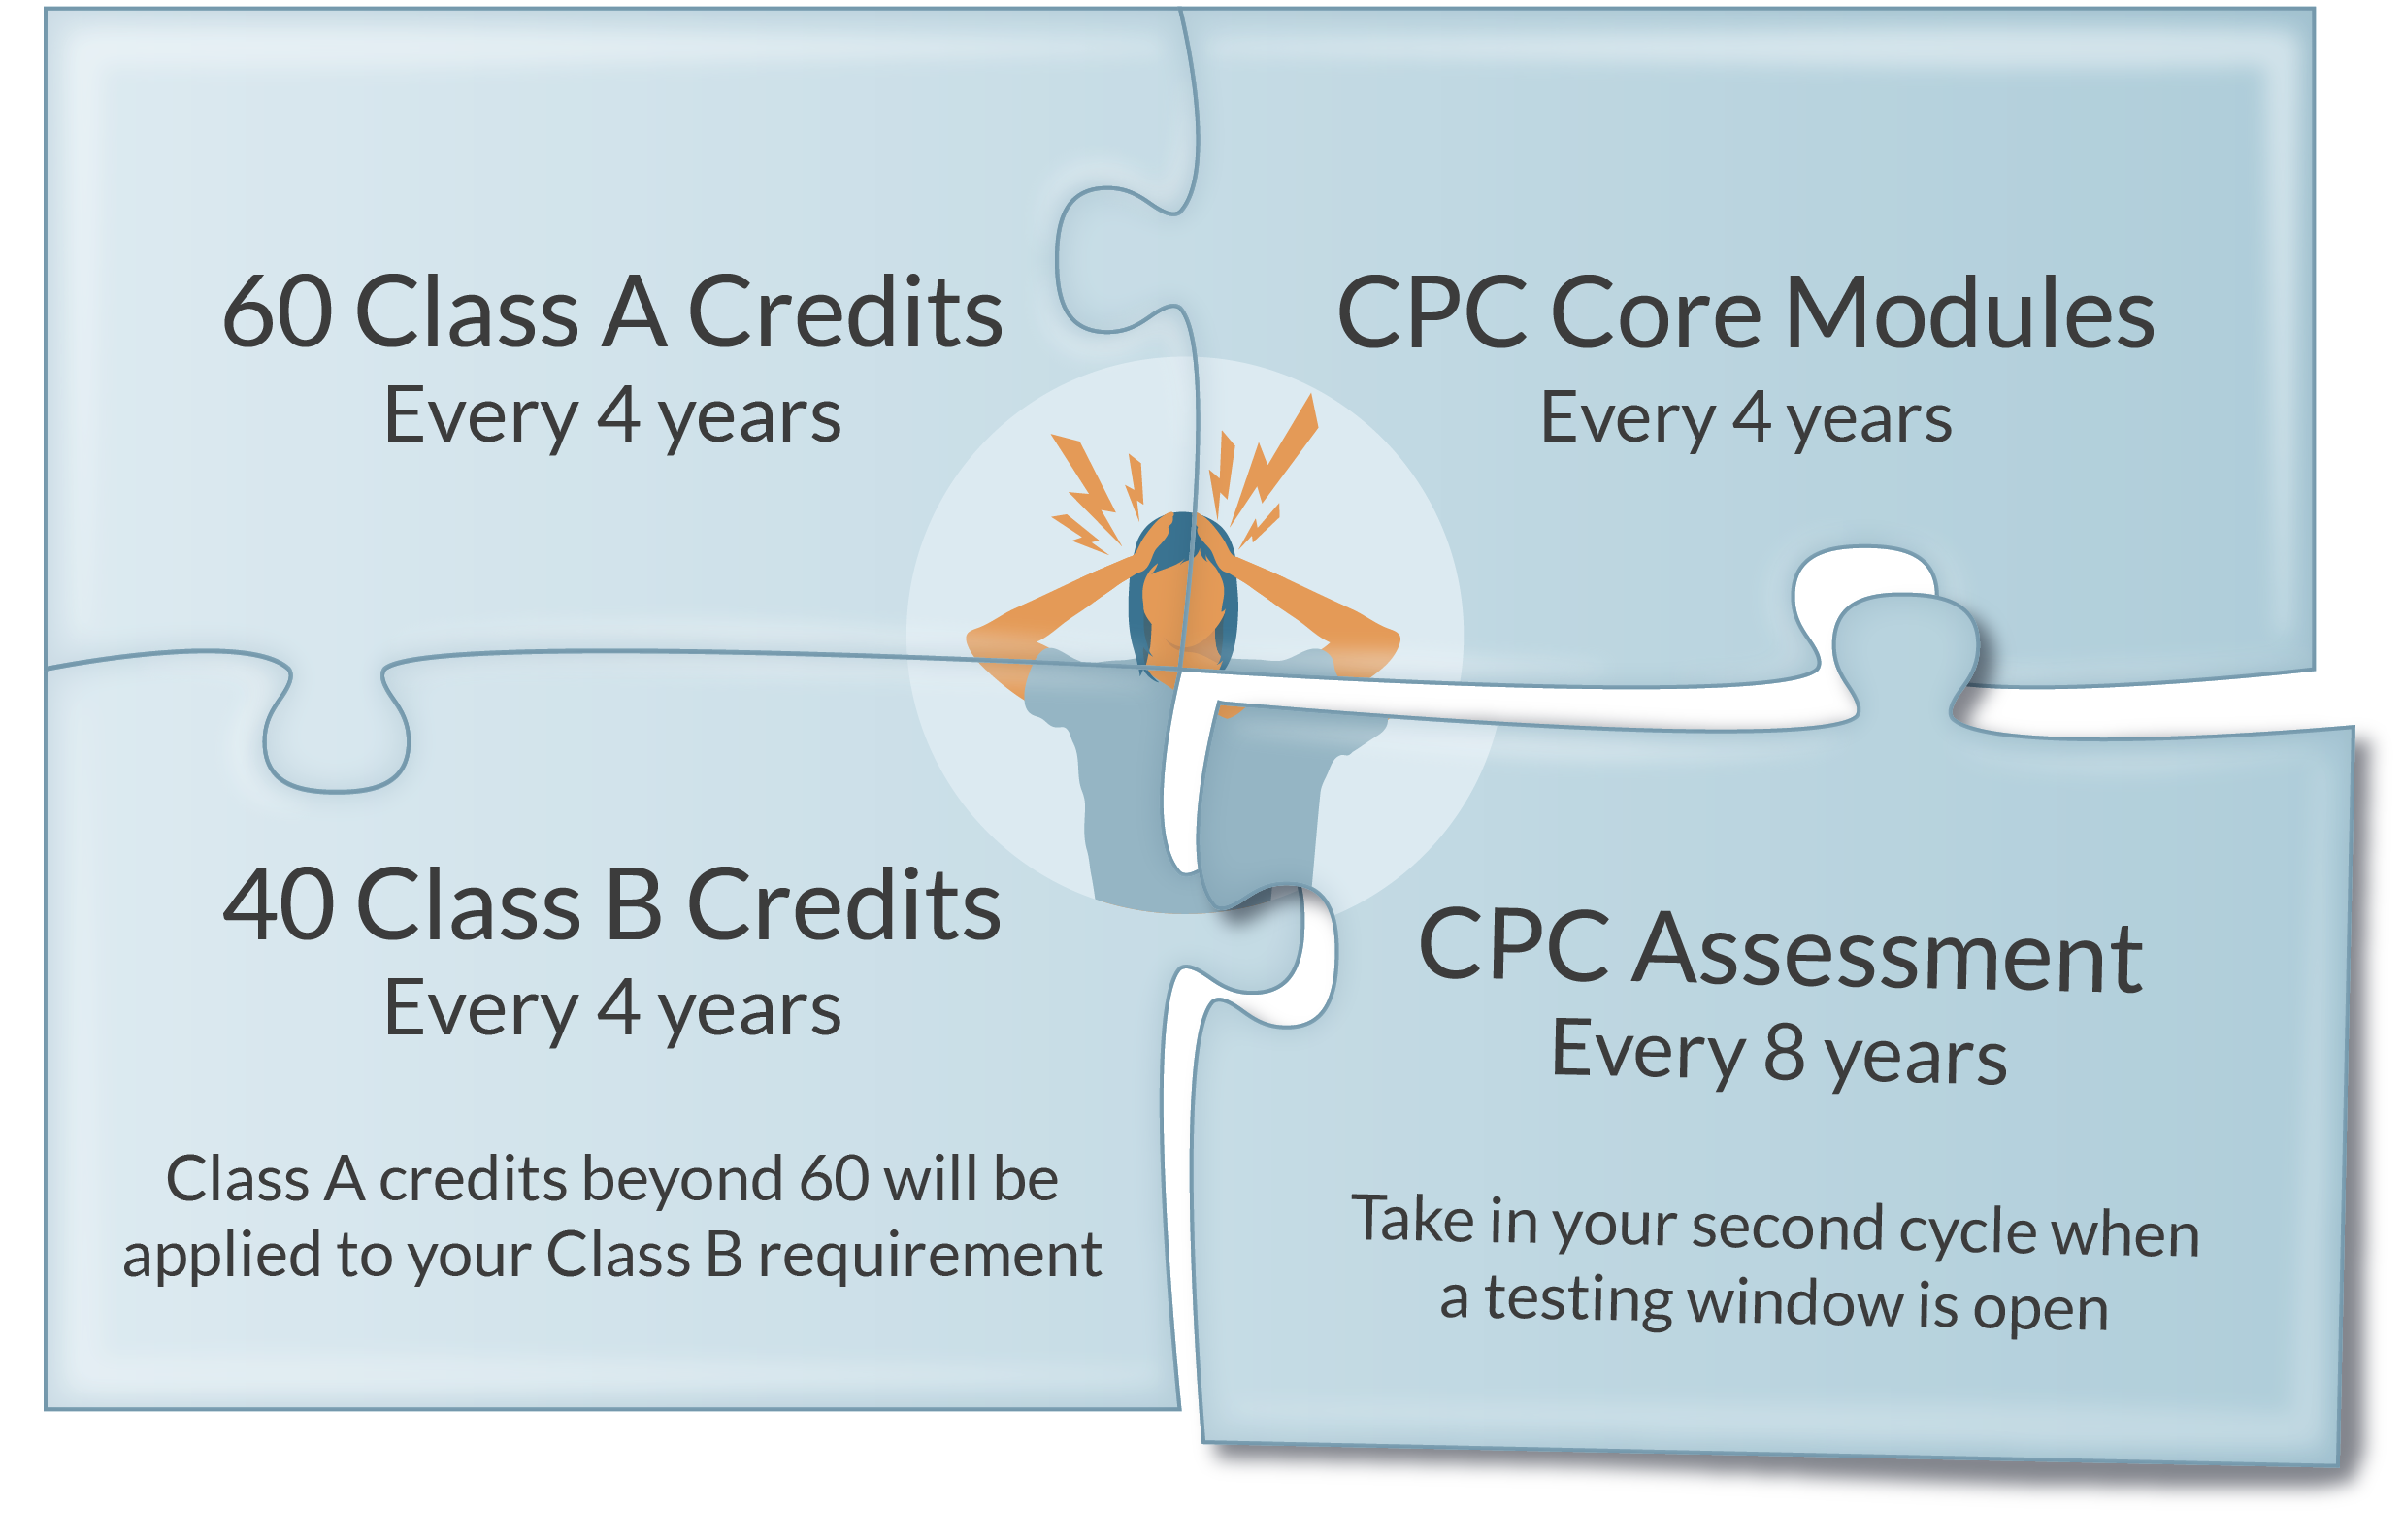 CRNA's have high continuing education standards with requirements to complete 60 Class A Credits every 4 years, CPC Core Modules every 4 years, 40 Class B Credits every four years and a CPC assessment every 8 years.